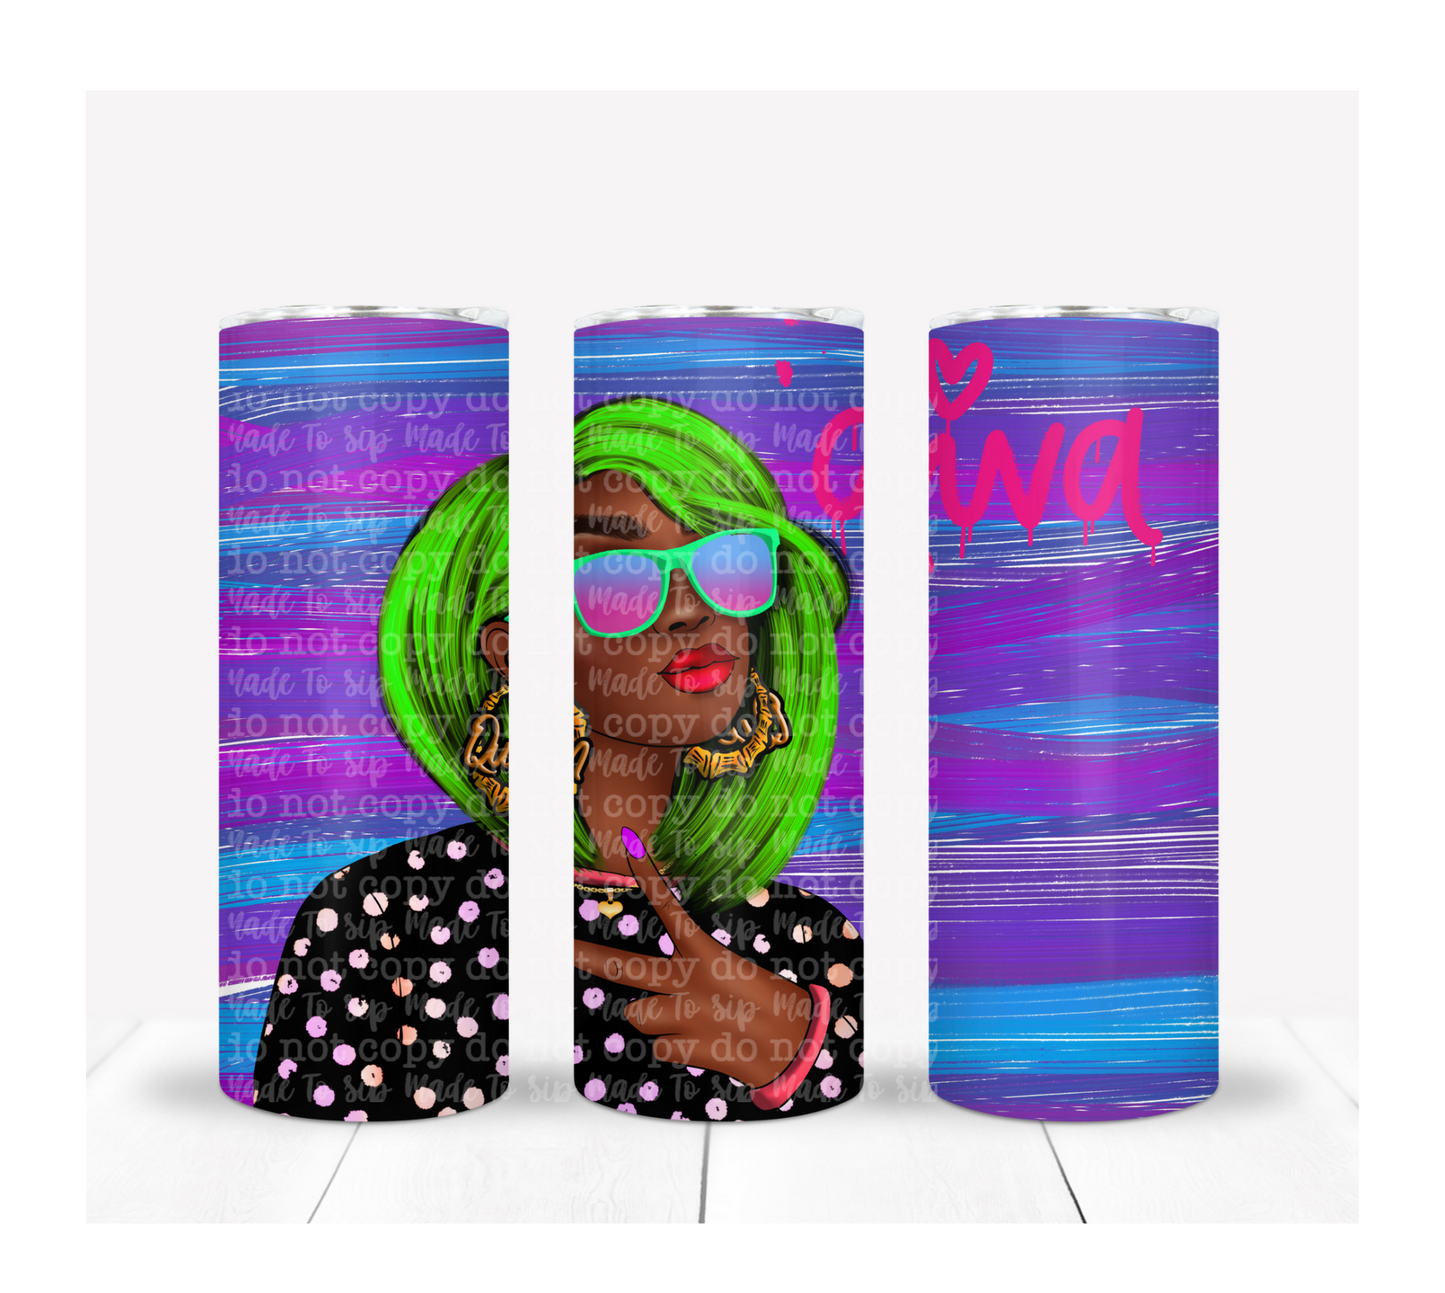 Diva - A Made To Sip Exclusive Tumbler